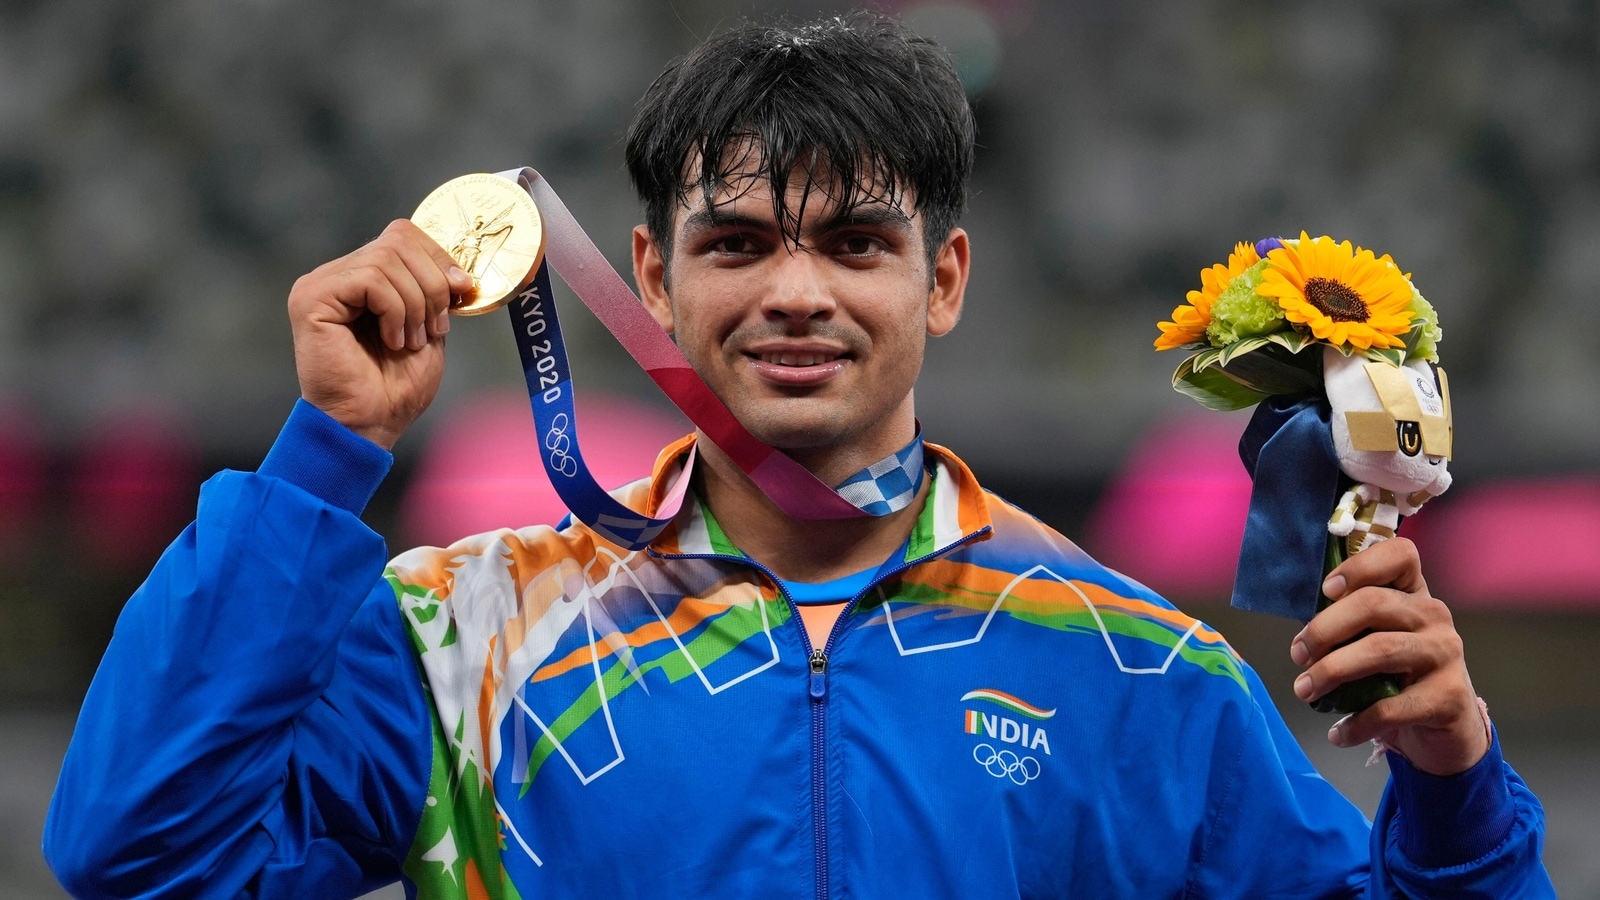 'It's unbelievable' Neeraj Chopra reacts after historic gold at Tokyo